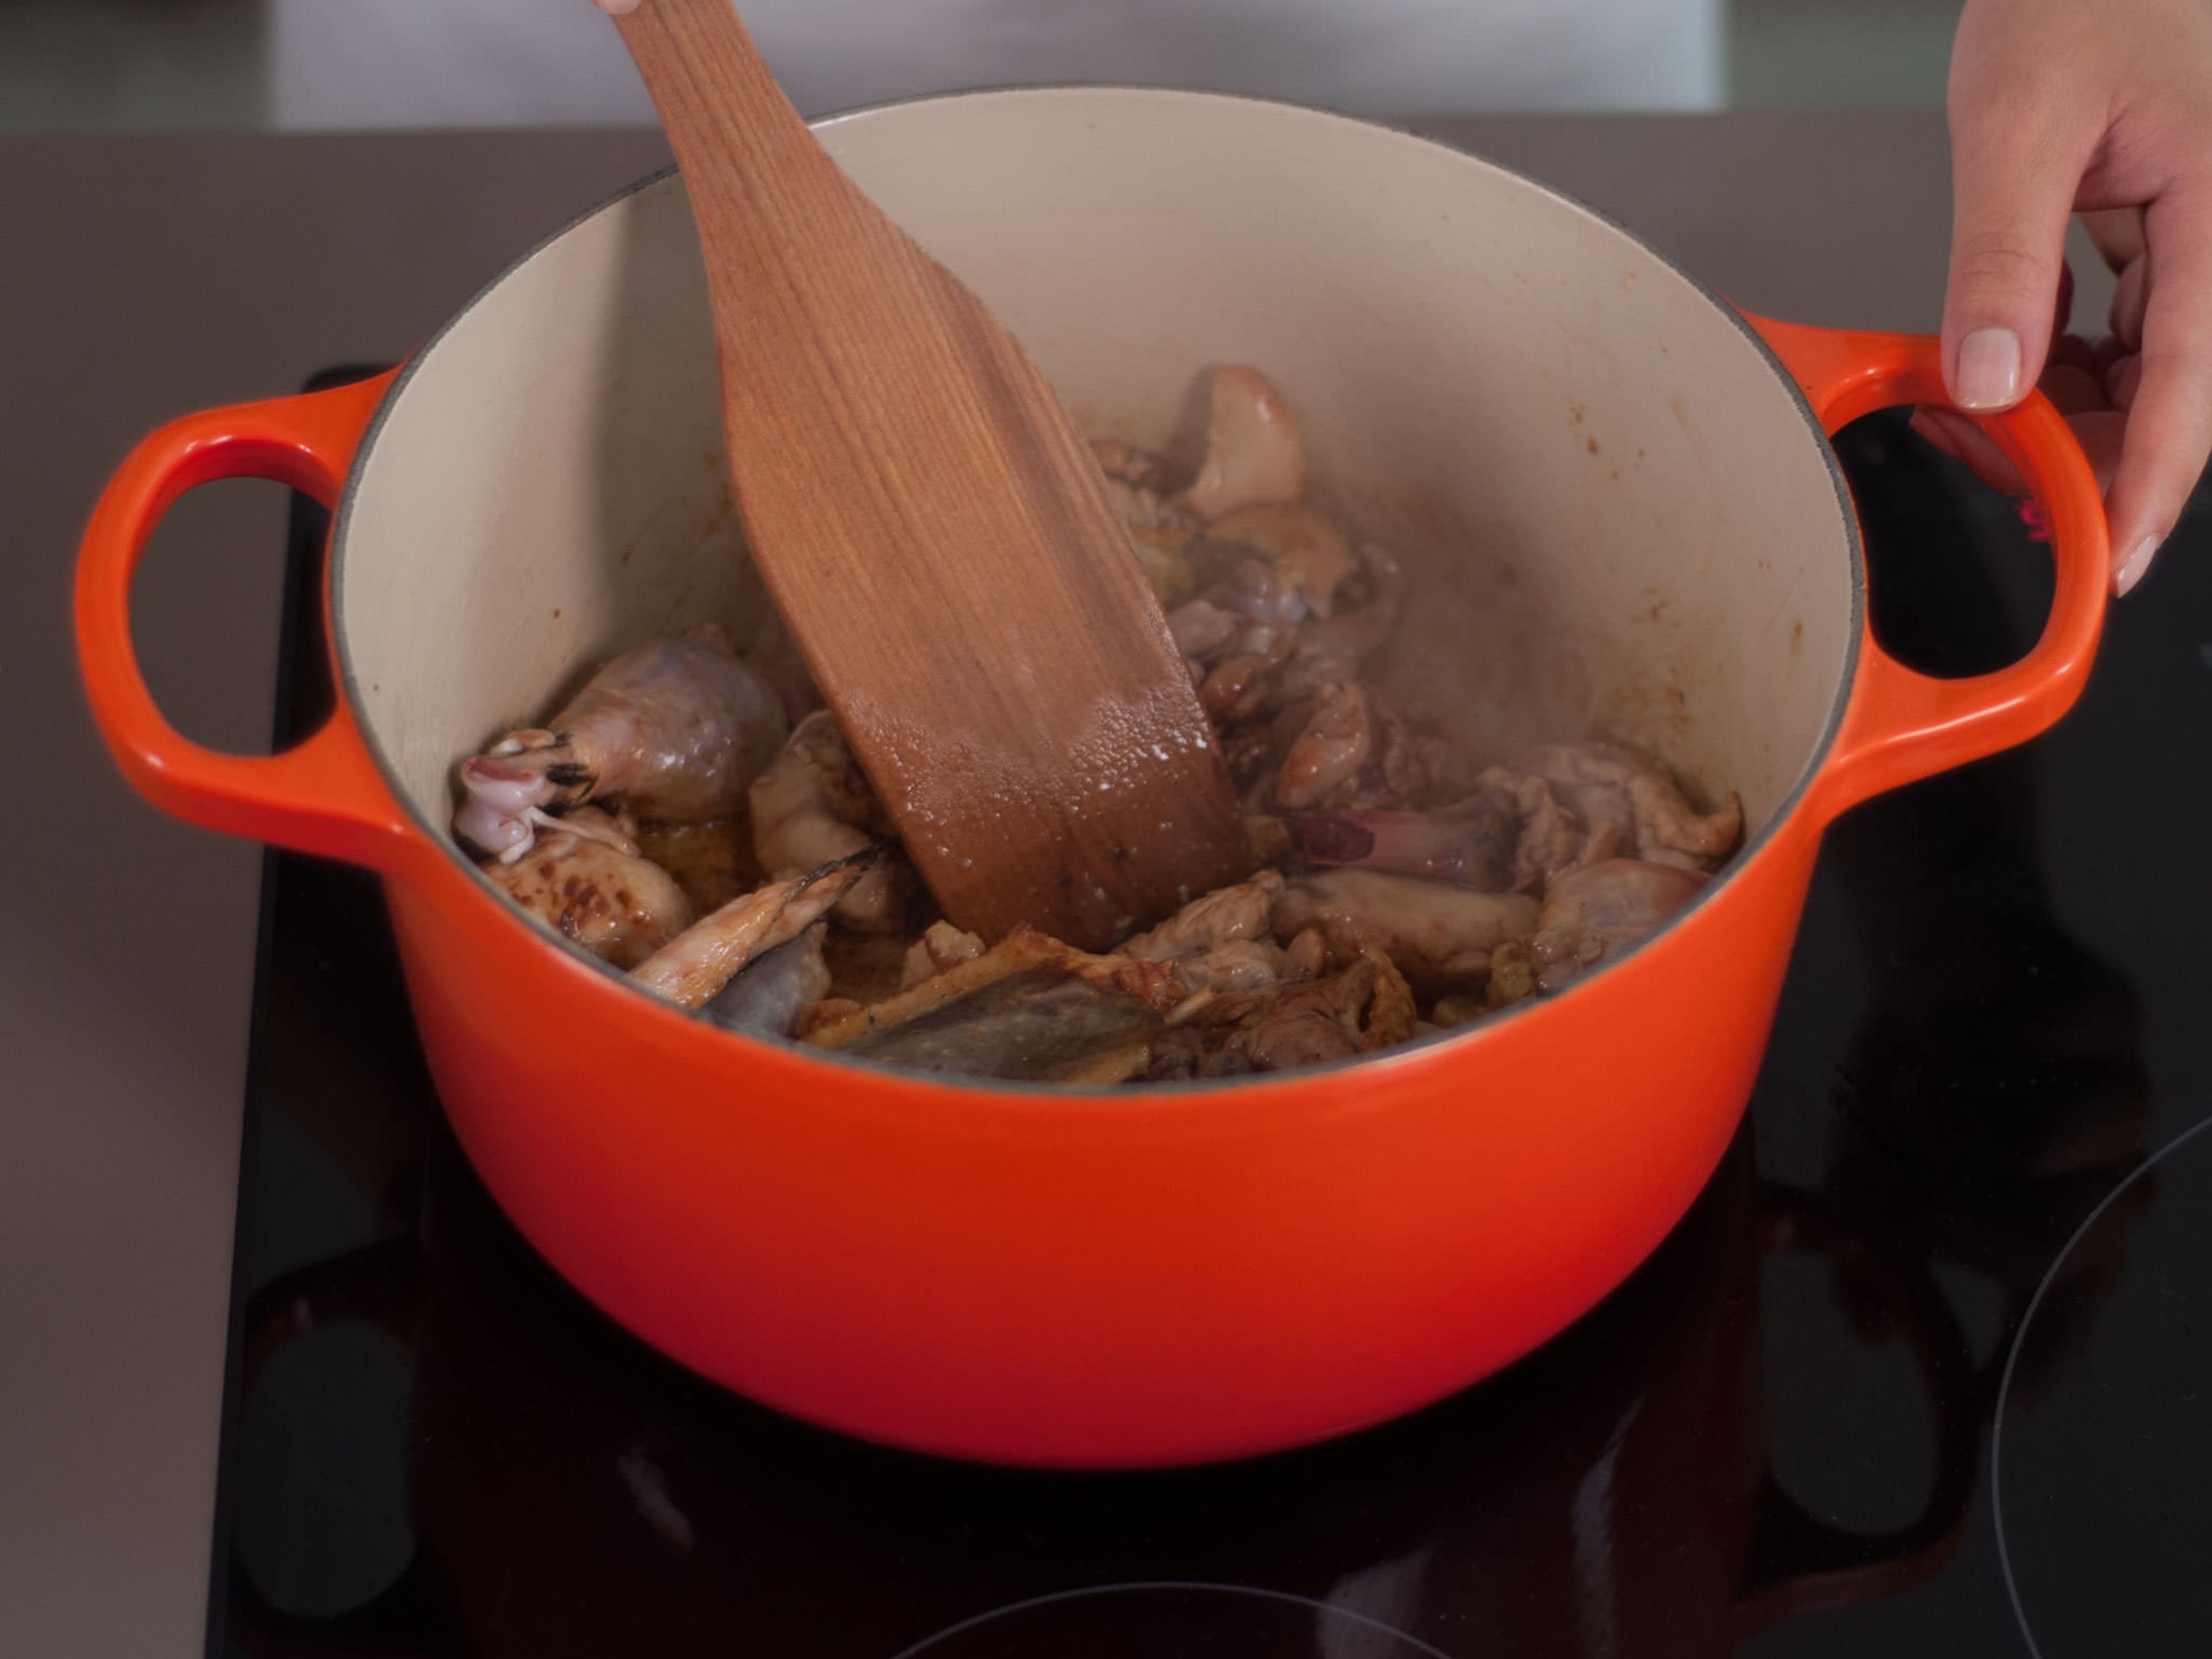 Add vegetable oil and sugar to a large saucepan. Cook over medium heat until a dark caramel forms. Add chicken pieces and sauté for approx. 1 – 2 min. until browned.